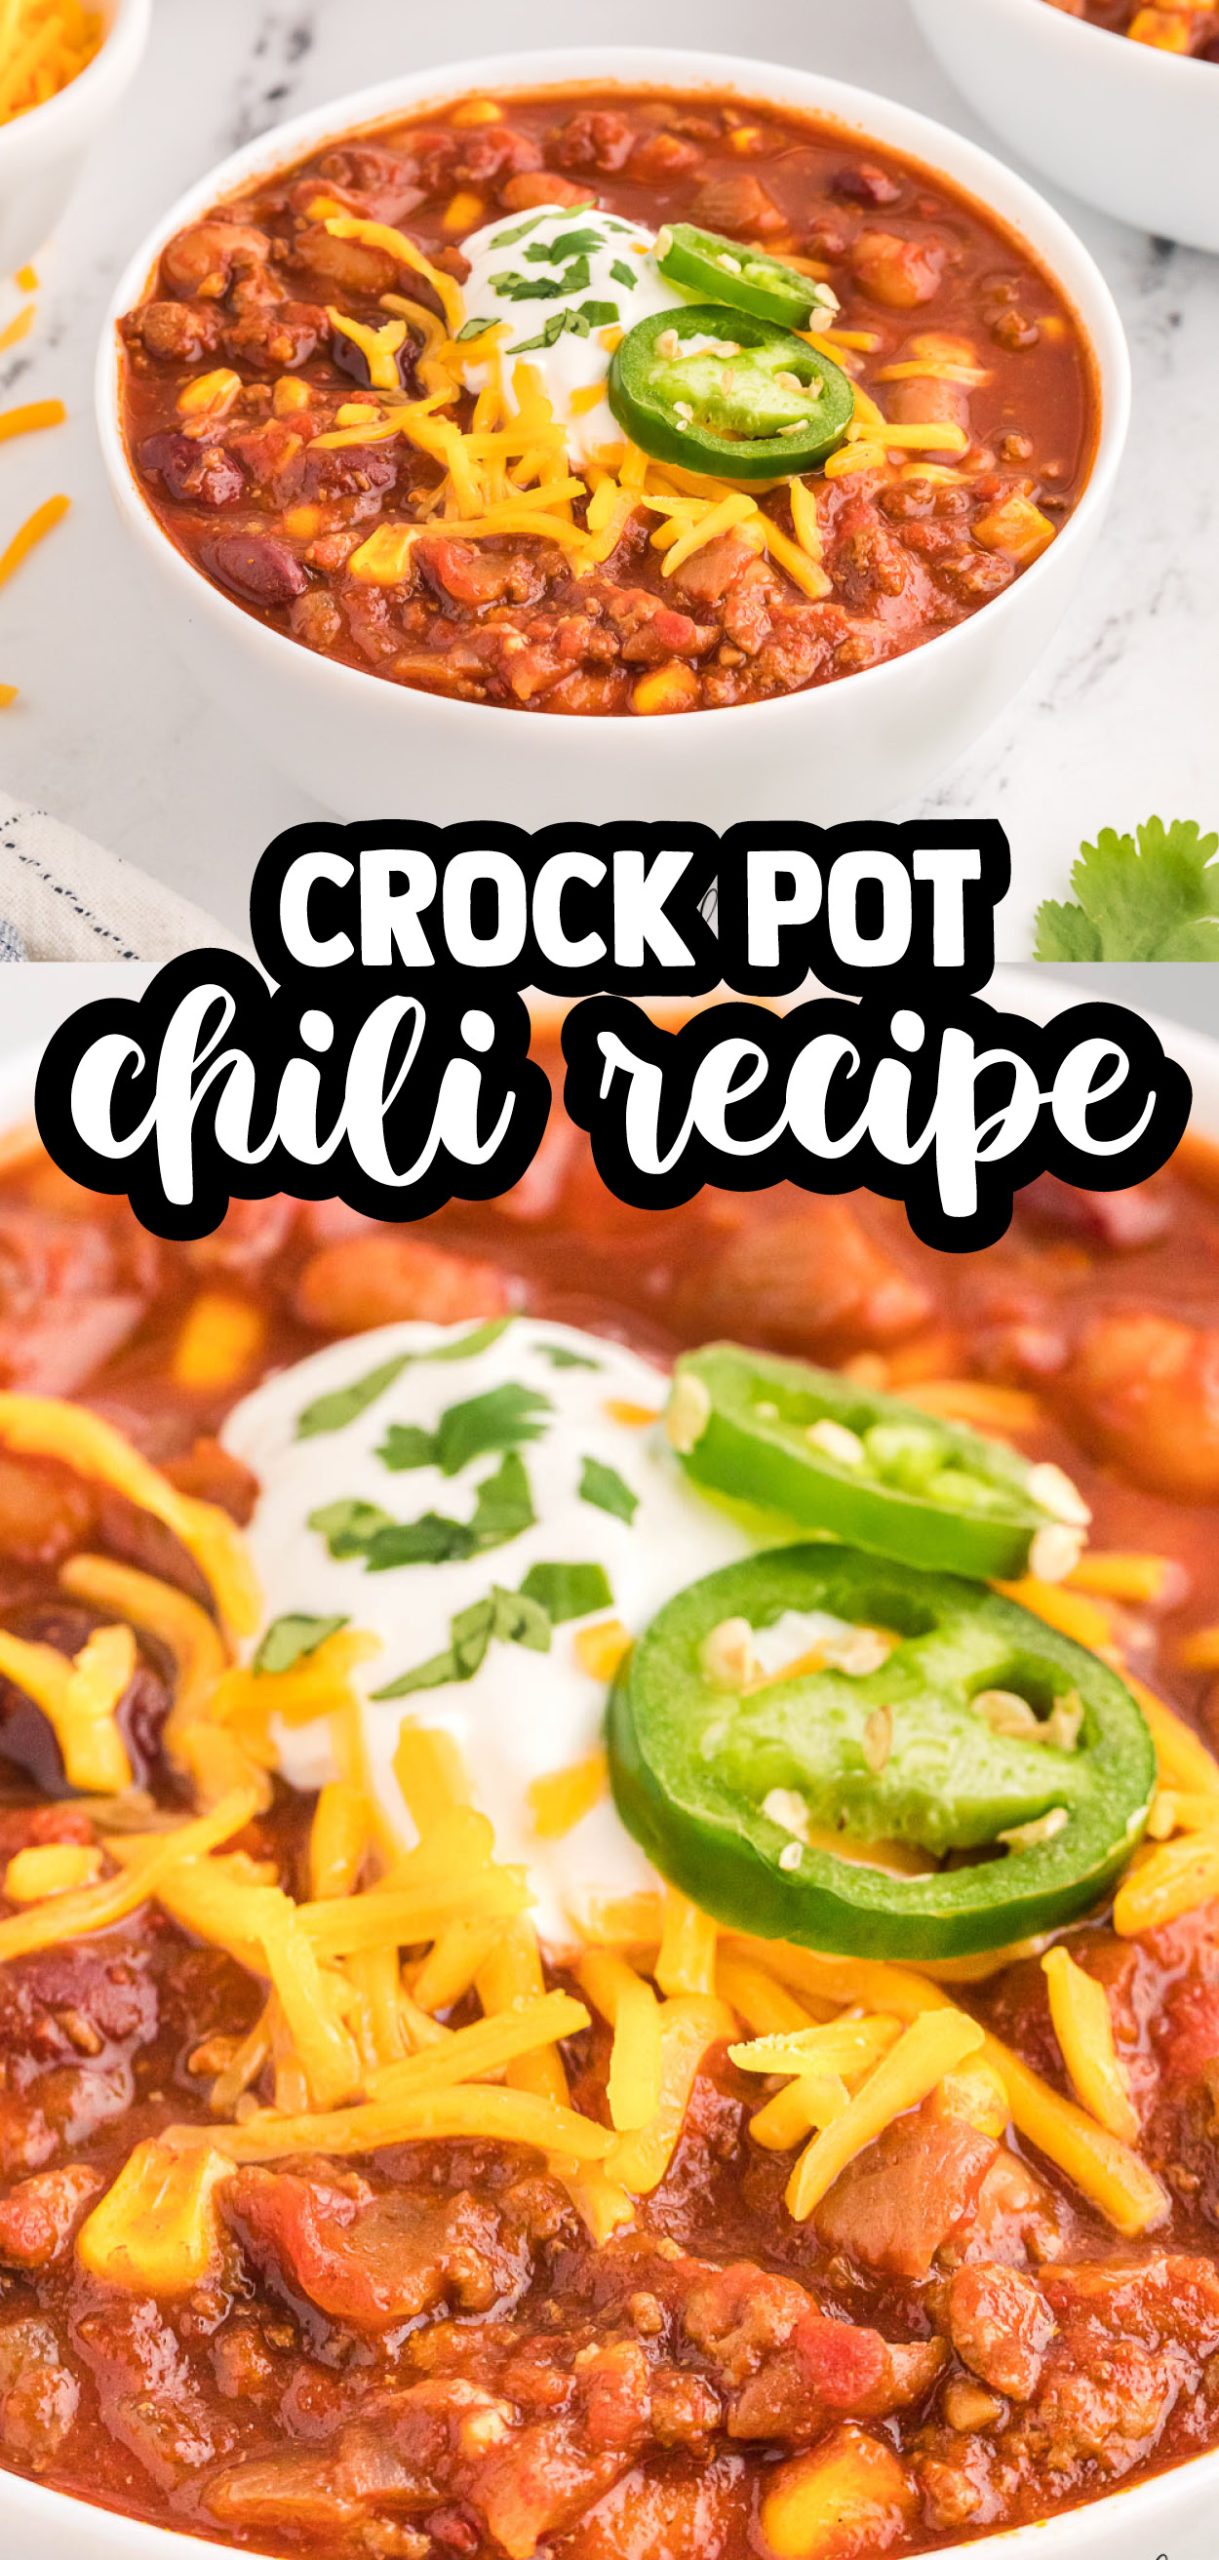 This is an easy crockpot turkey chili recipe! The low and slow cooking process creates the juiciest and richest flavor.